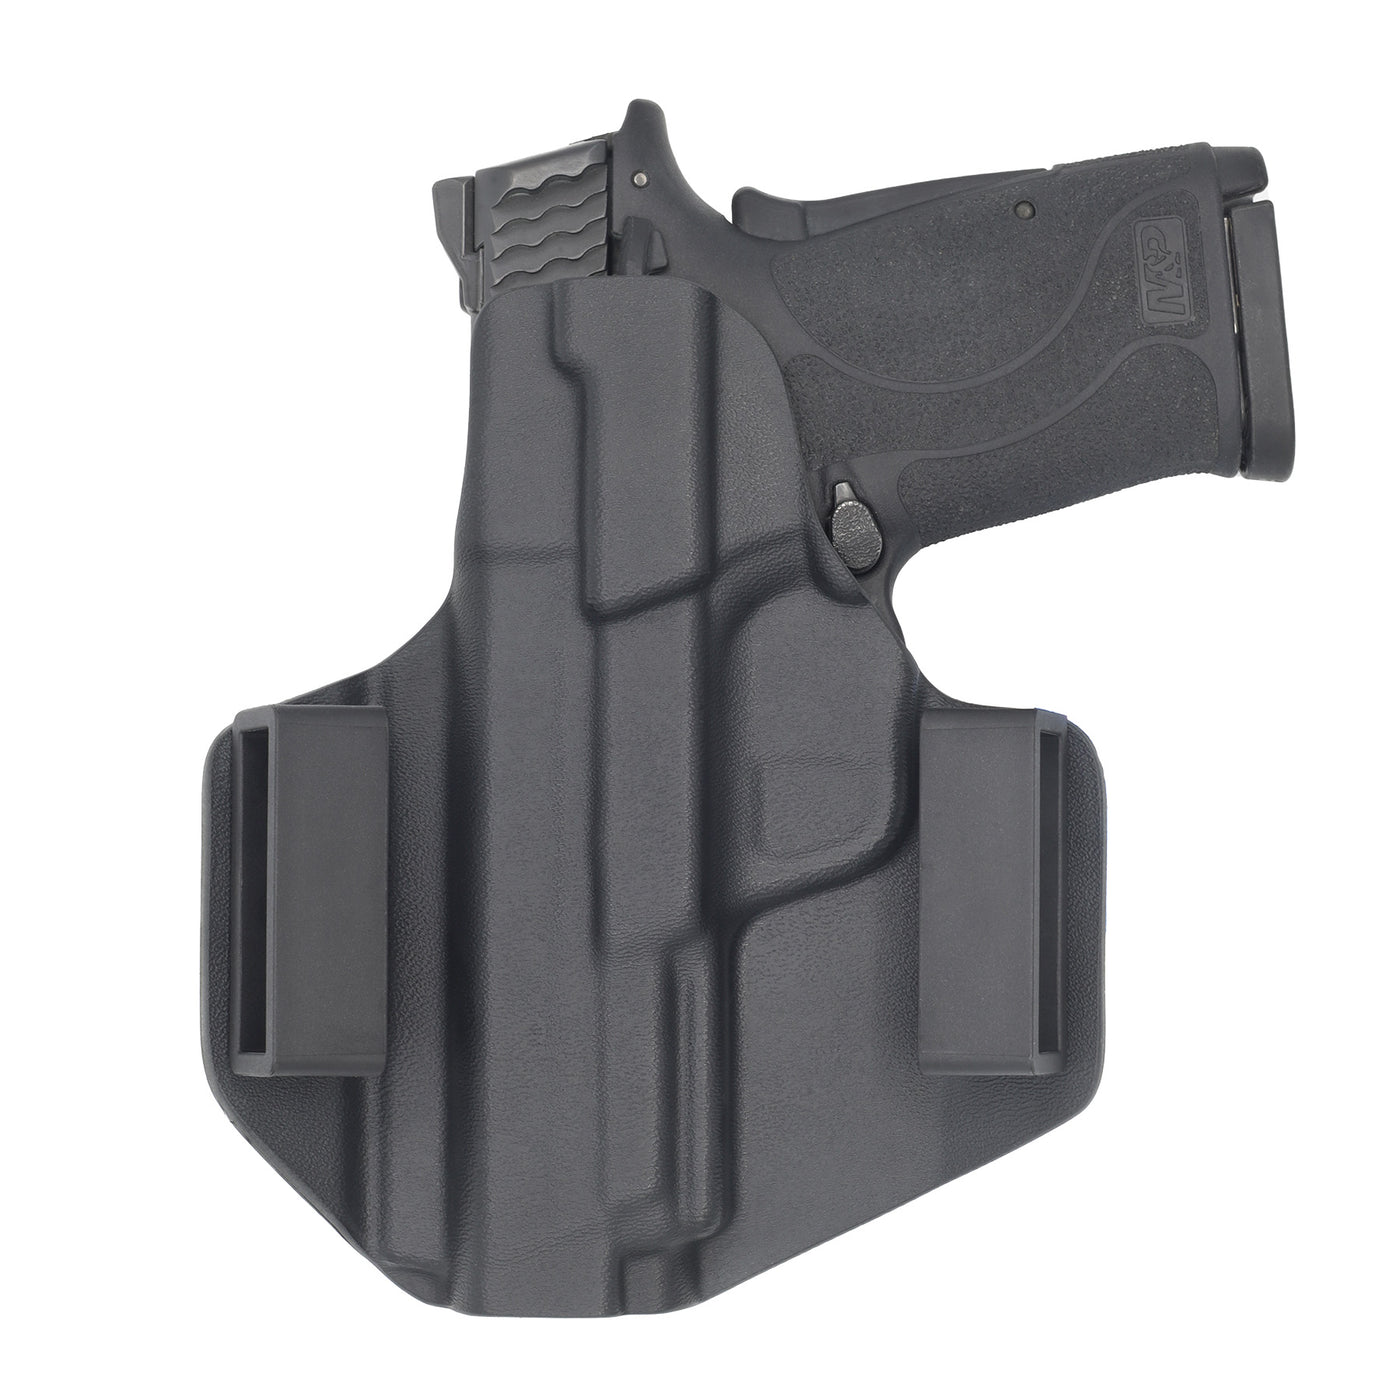 This is a C&G Holsters Covert series Outside the Waistband Smith & Wesson M&P Shield 9EZ with the firearm showing a rear view.